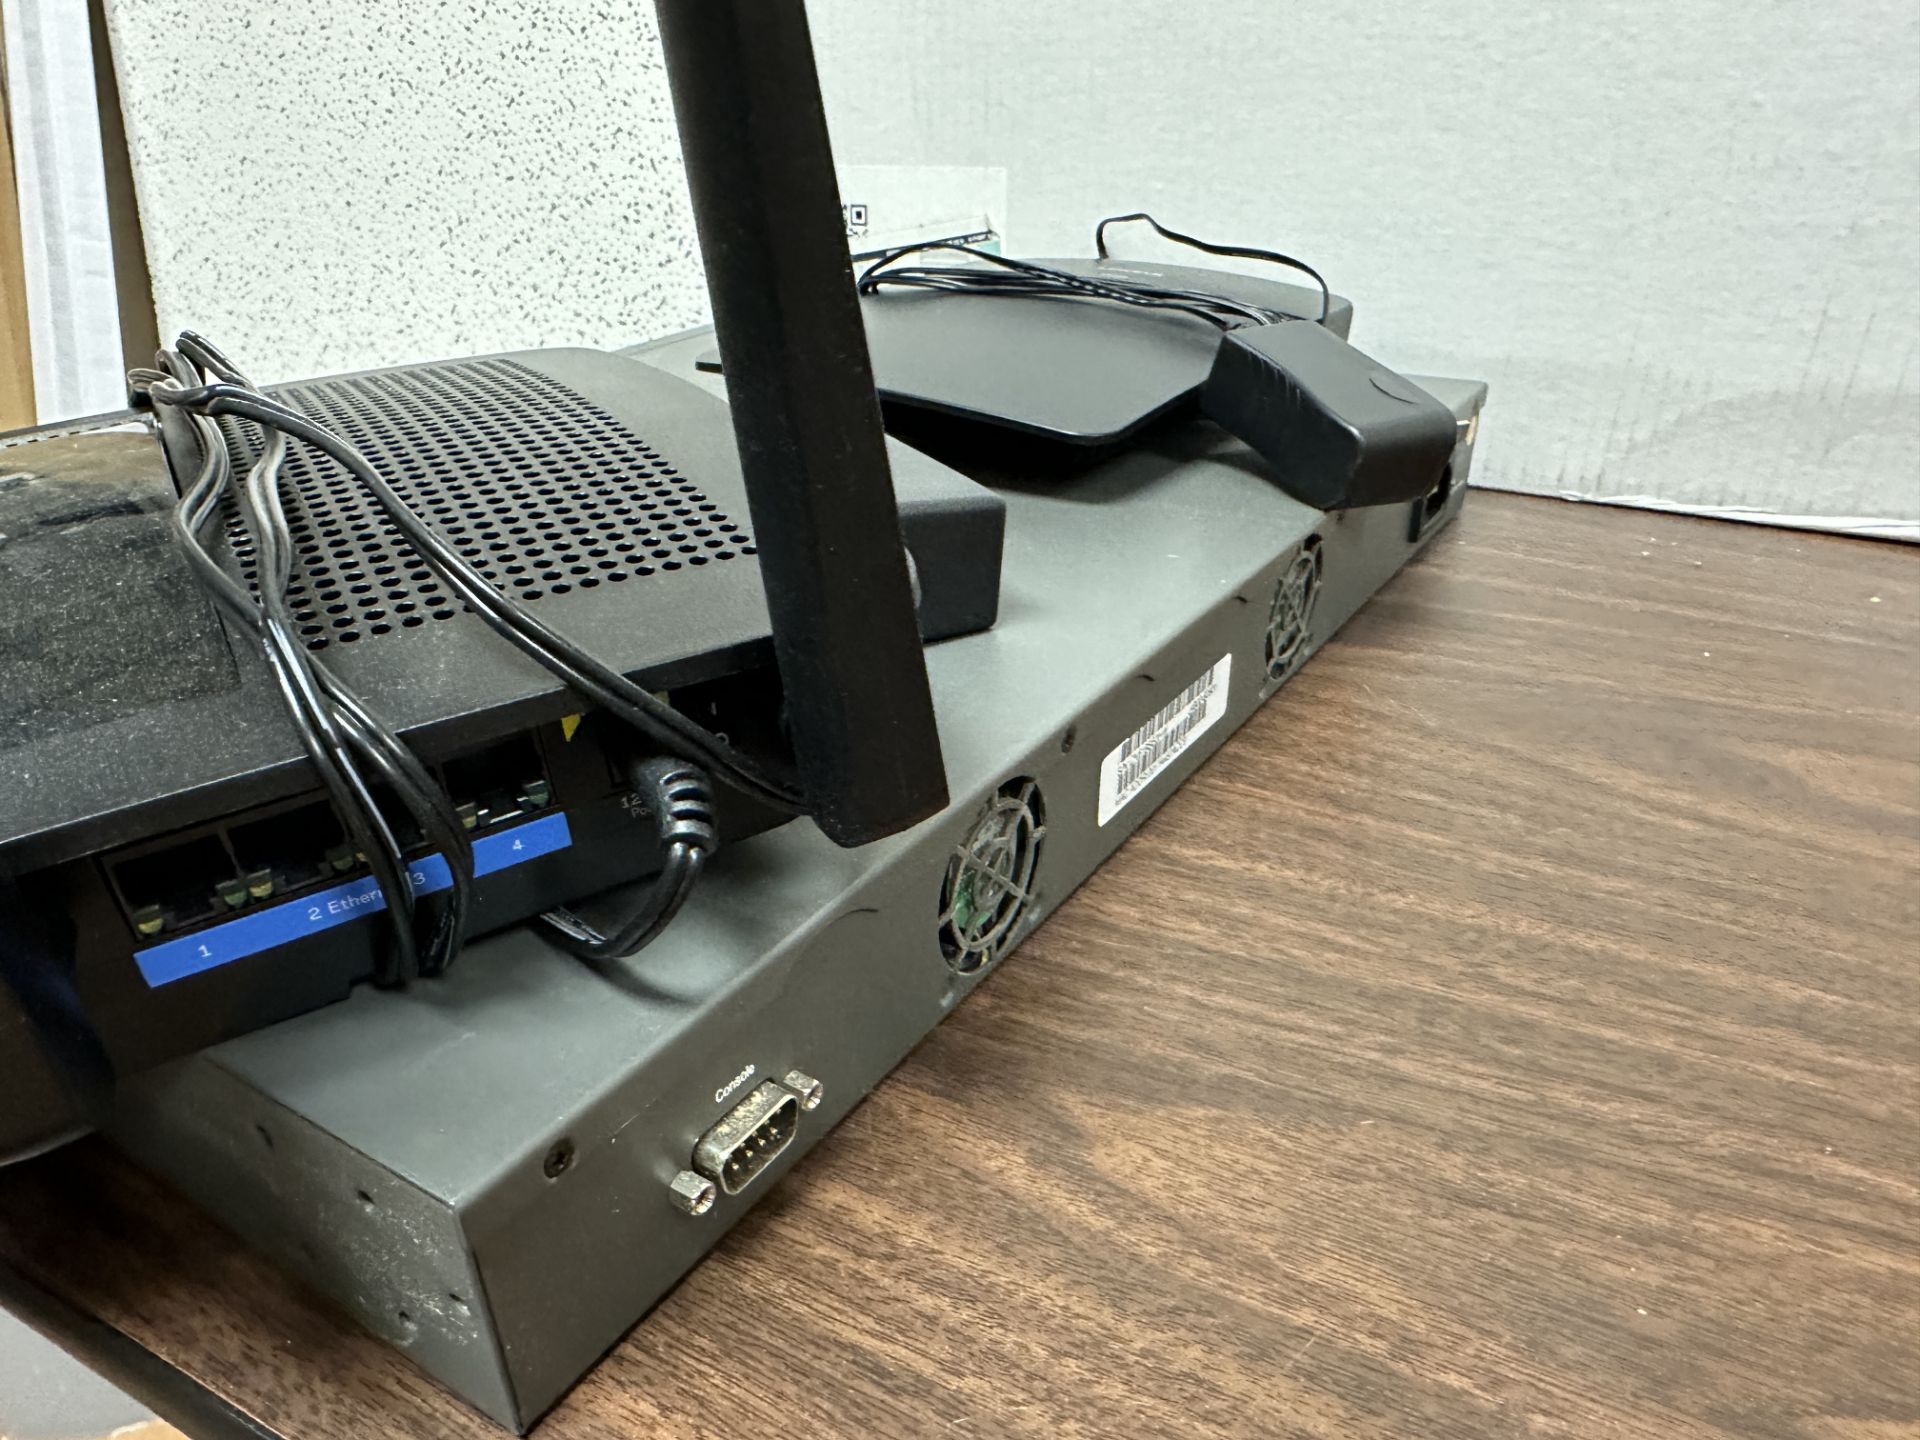 Networking Equipment: HO Procurve Switch, Linksys E1200 and Linksys EA7300, FA3 - Image 7 of 7